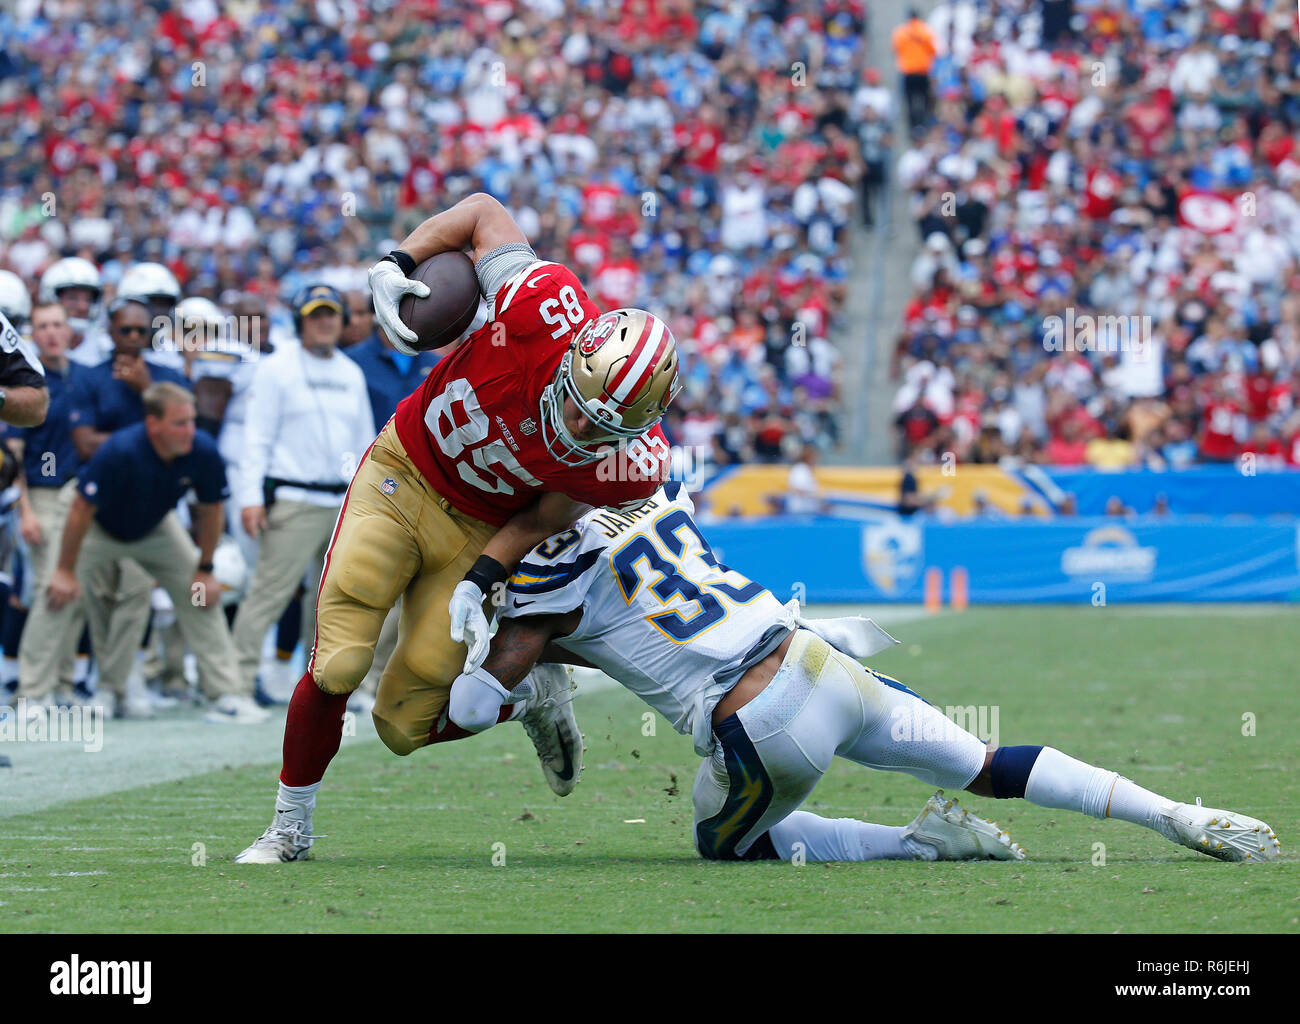 September 30, 2018 San Francisco 49ers tight end George Kittle (85) is  tackled by Los Angeles Chargers defensive back Derwin James (33) during the  football game between the San Francisco 49ers and